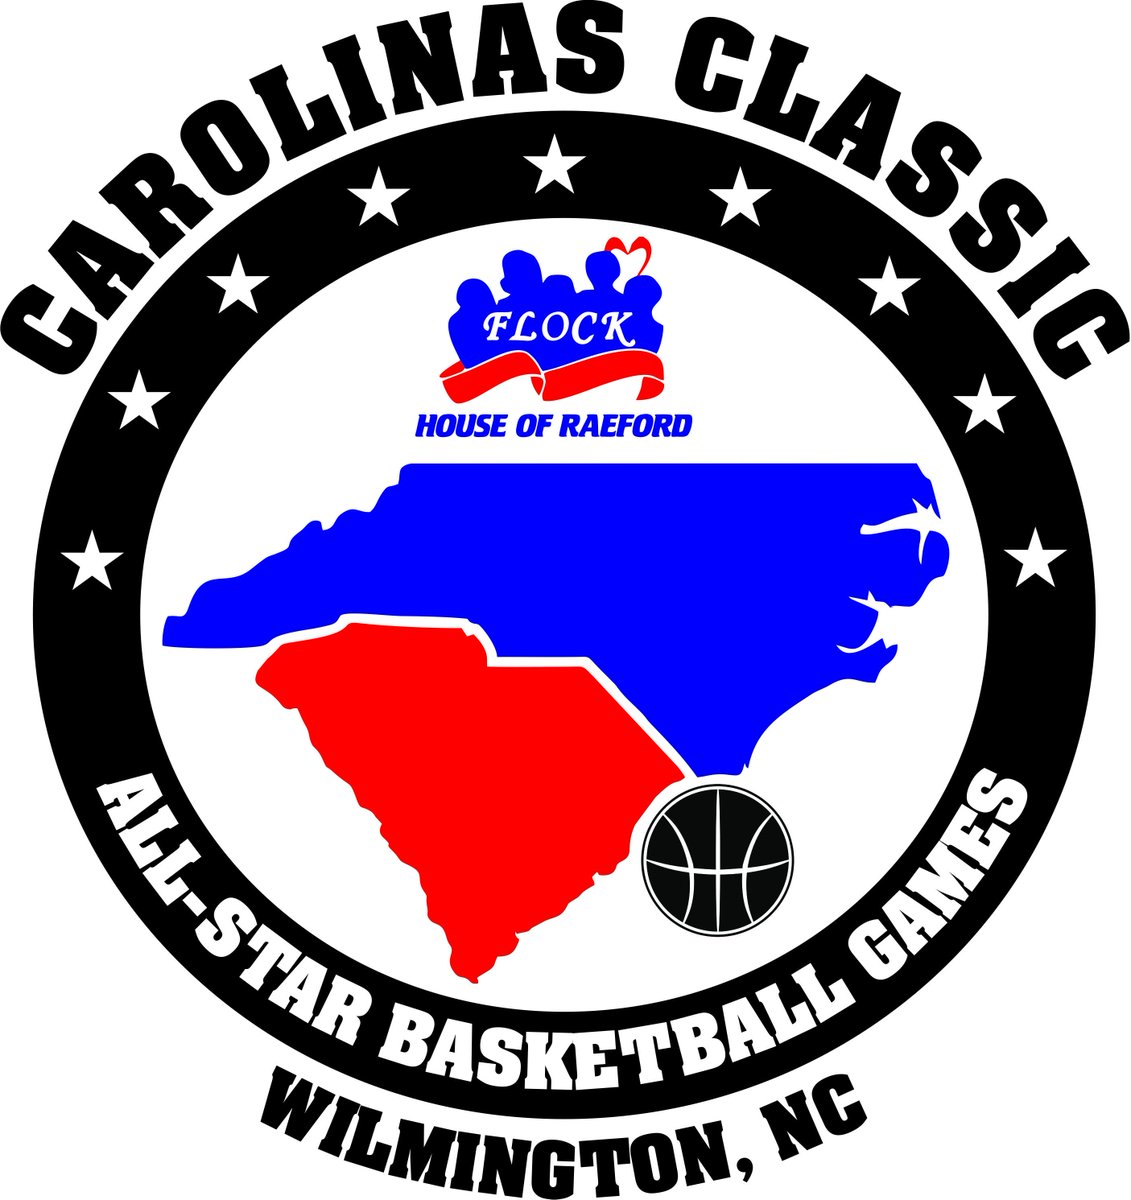 🏀🏀🏀What an amazing week of Basketball in Wilmington, NC. Thank you for all that participate and help make this amazing weekend happen Check out the 2024 Carolinas Classic Wrap-up Blog- House of Raeford Farms - houseofraeford.com/flock-news/car… @SCBCA @NCCoachesAssn